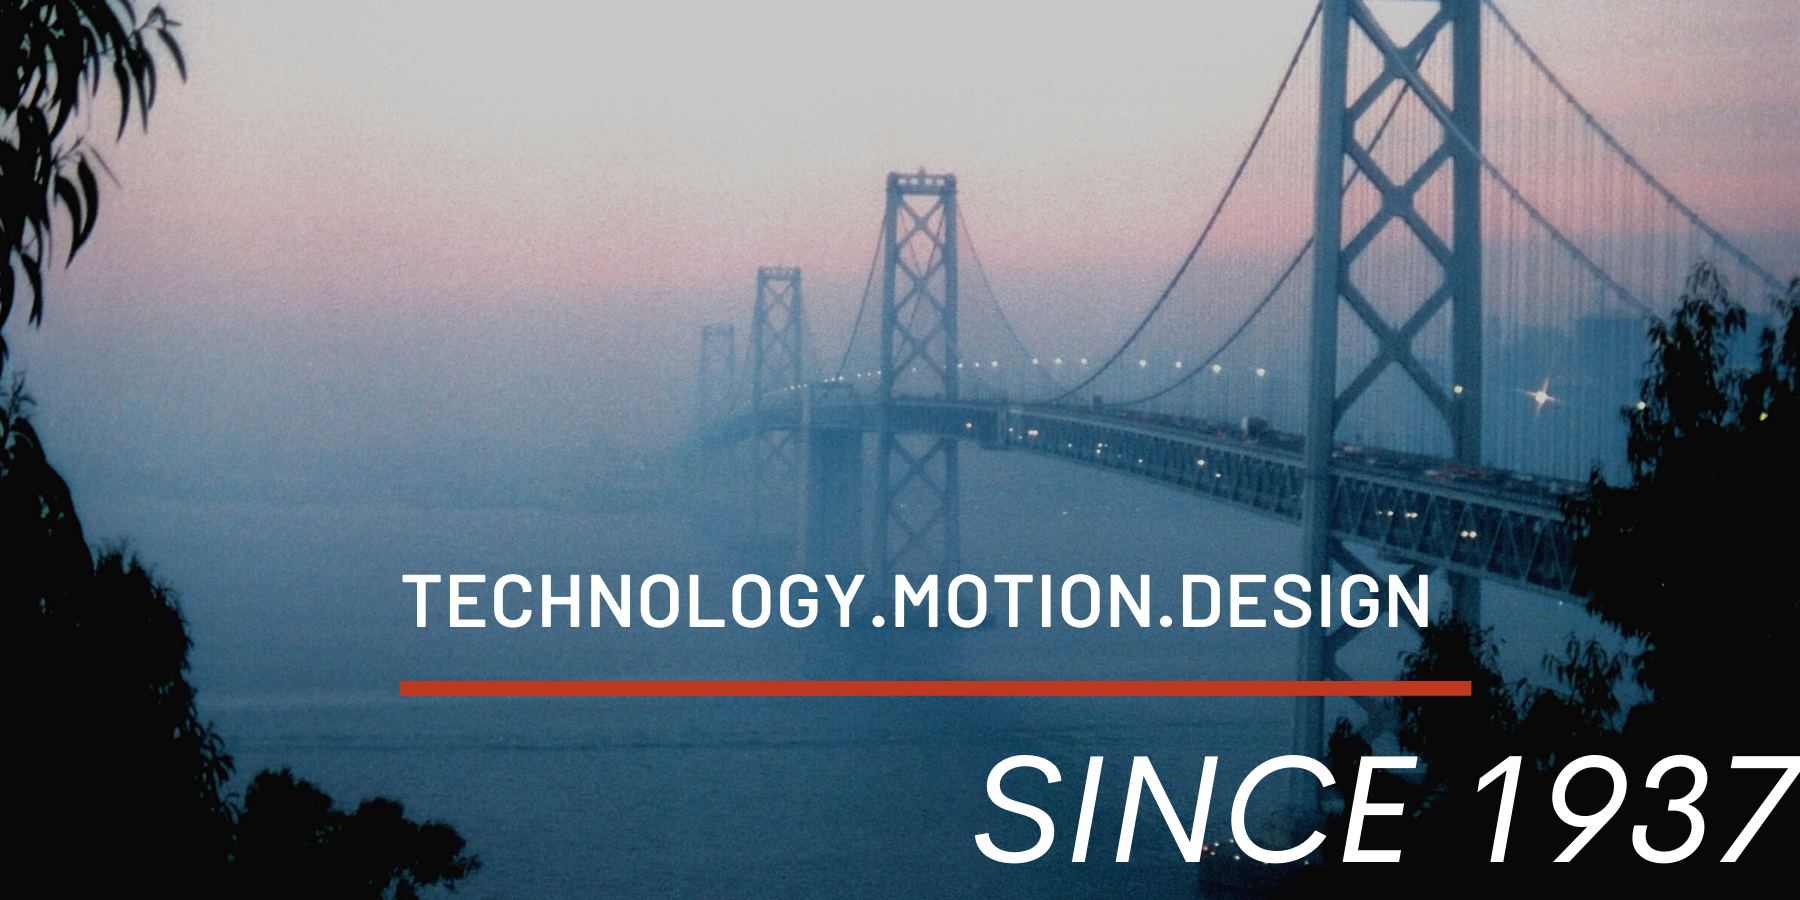 Technology Motion Design Since 1937 with a bridge behind the words